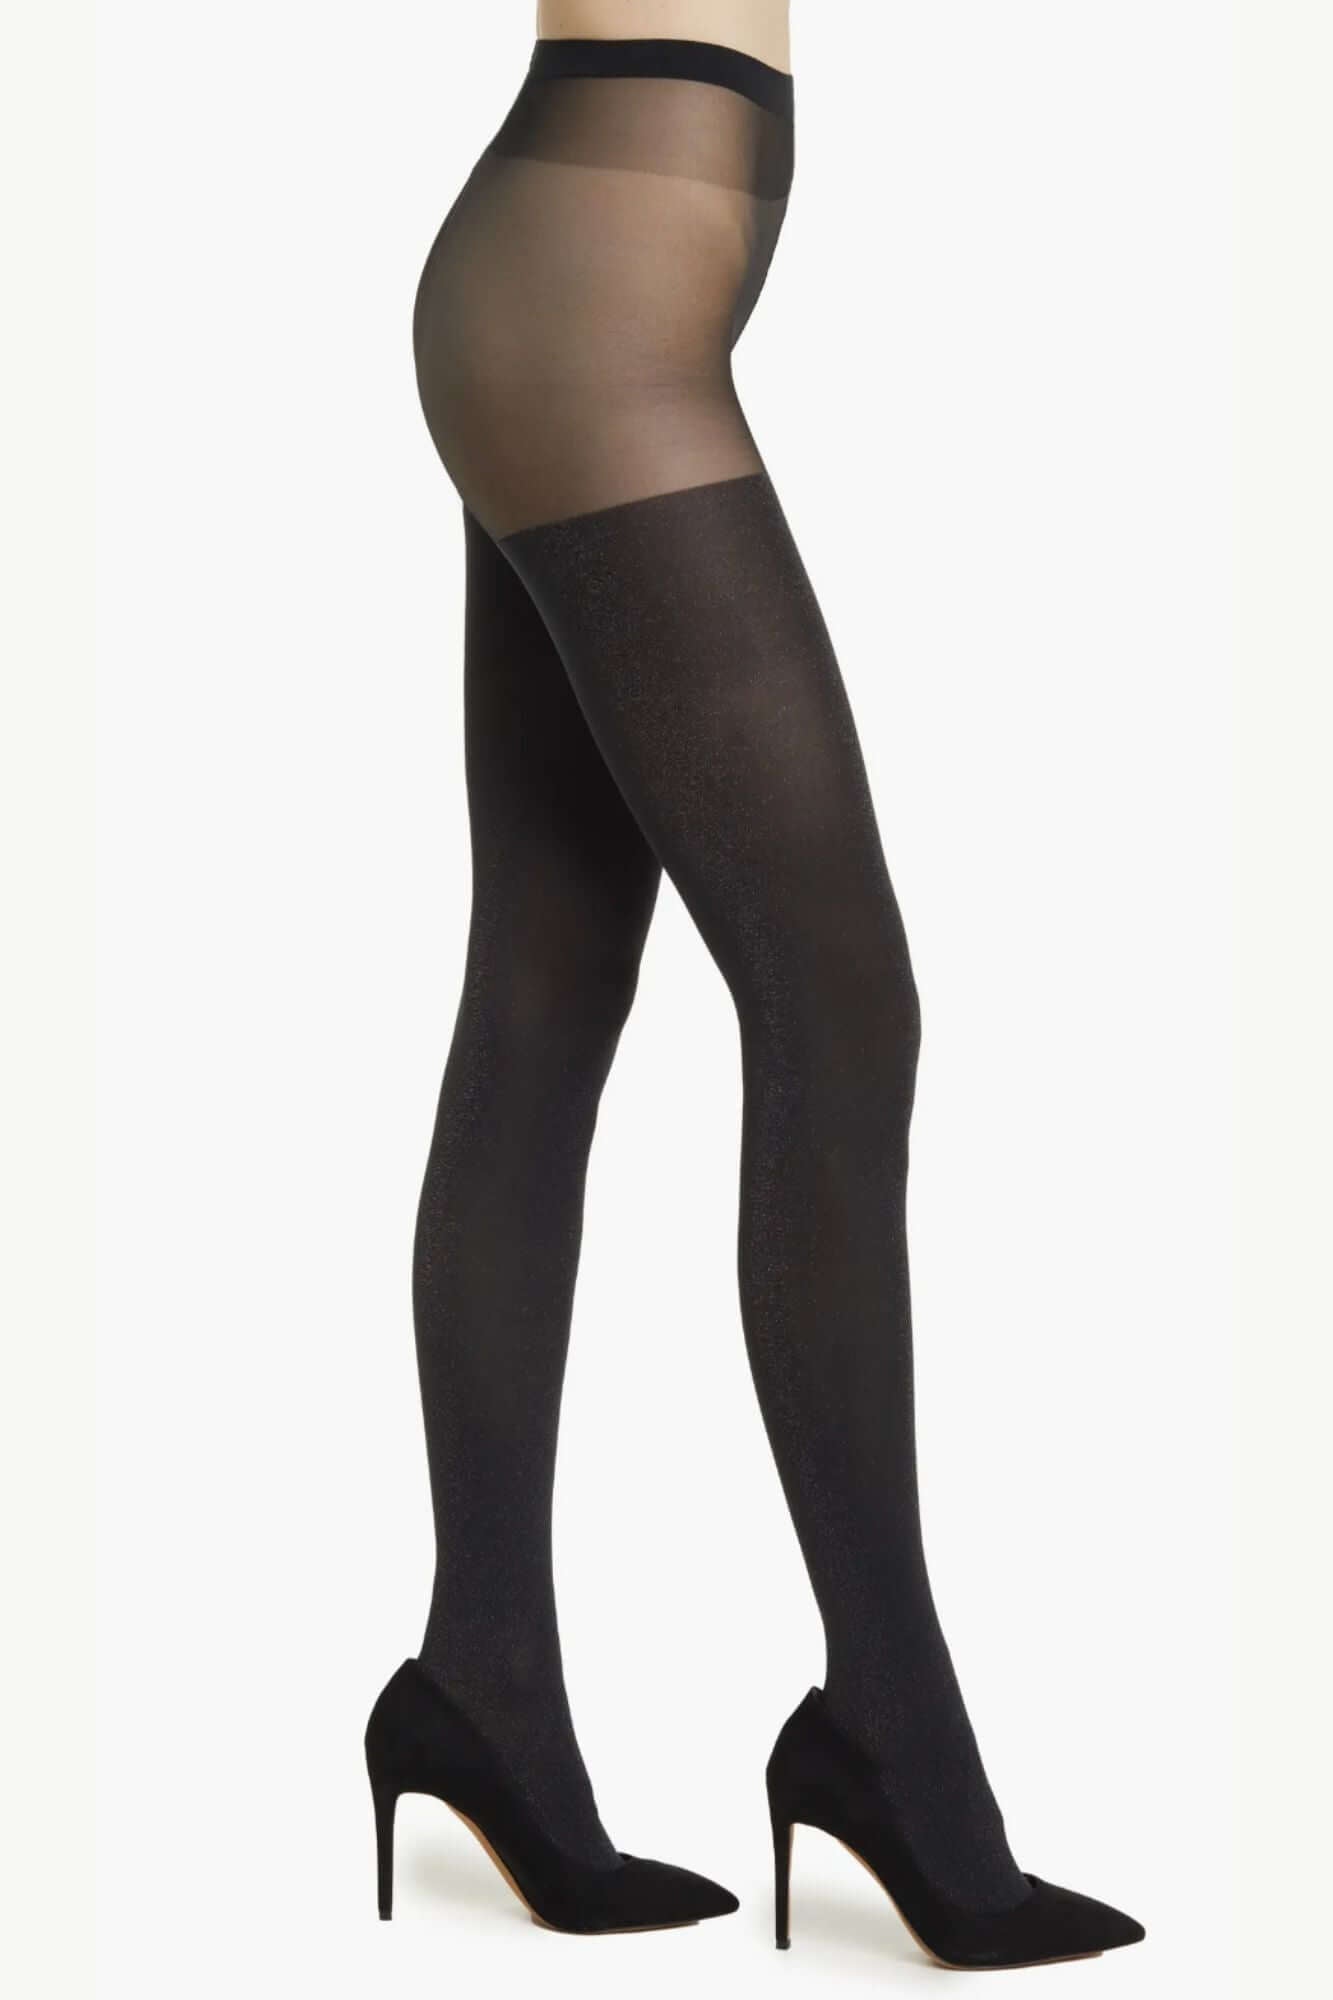 Only the Best Hosiery at Petticoat Lane - Wolford and Falke